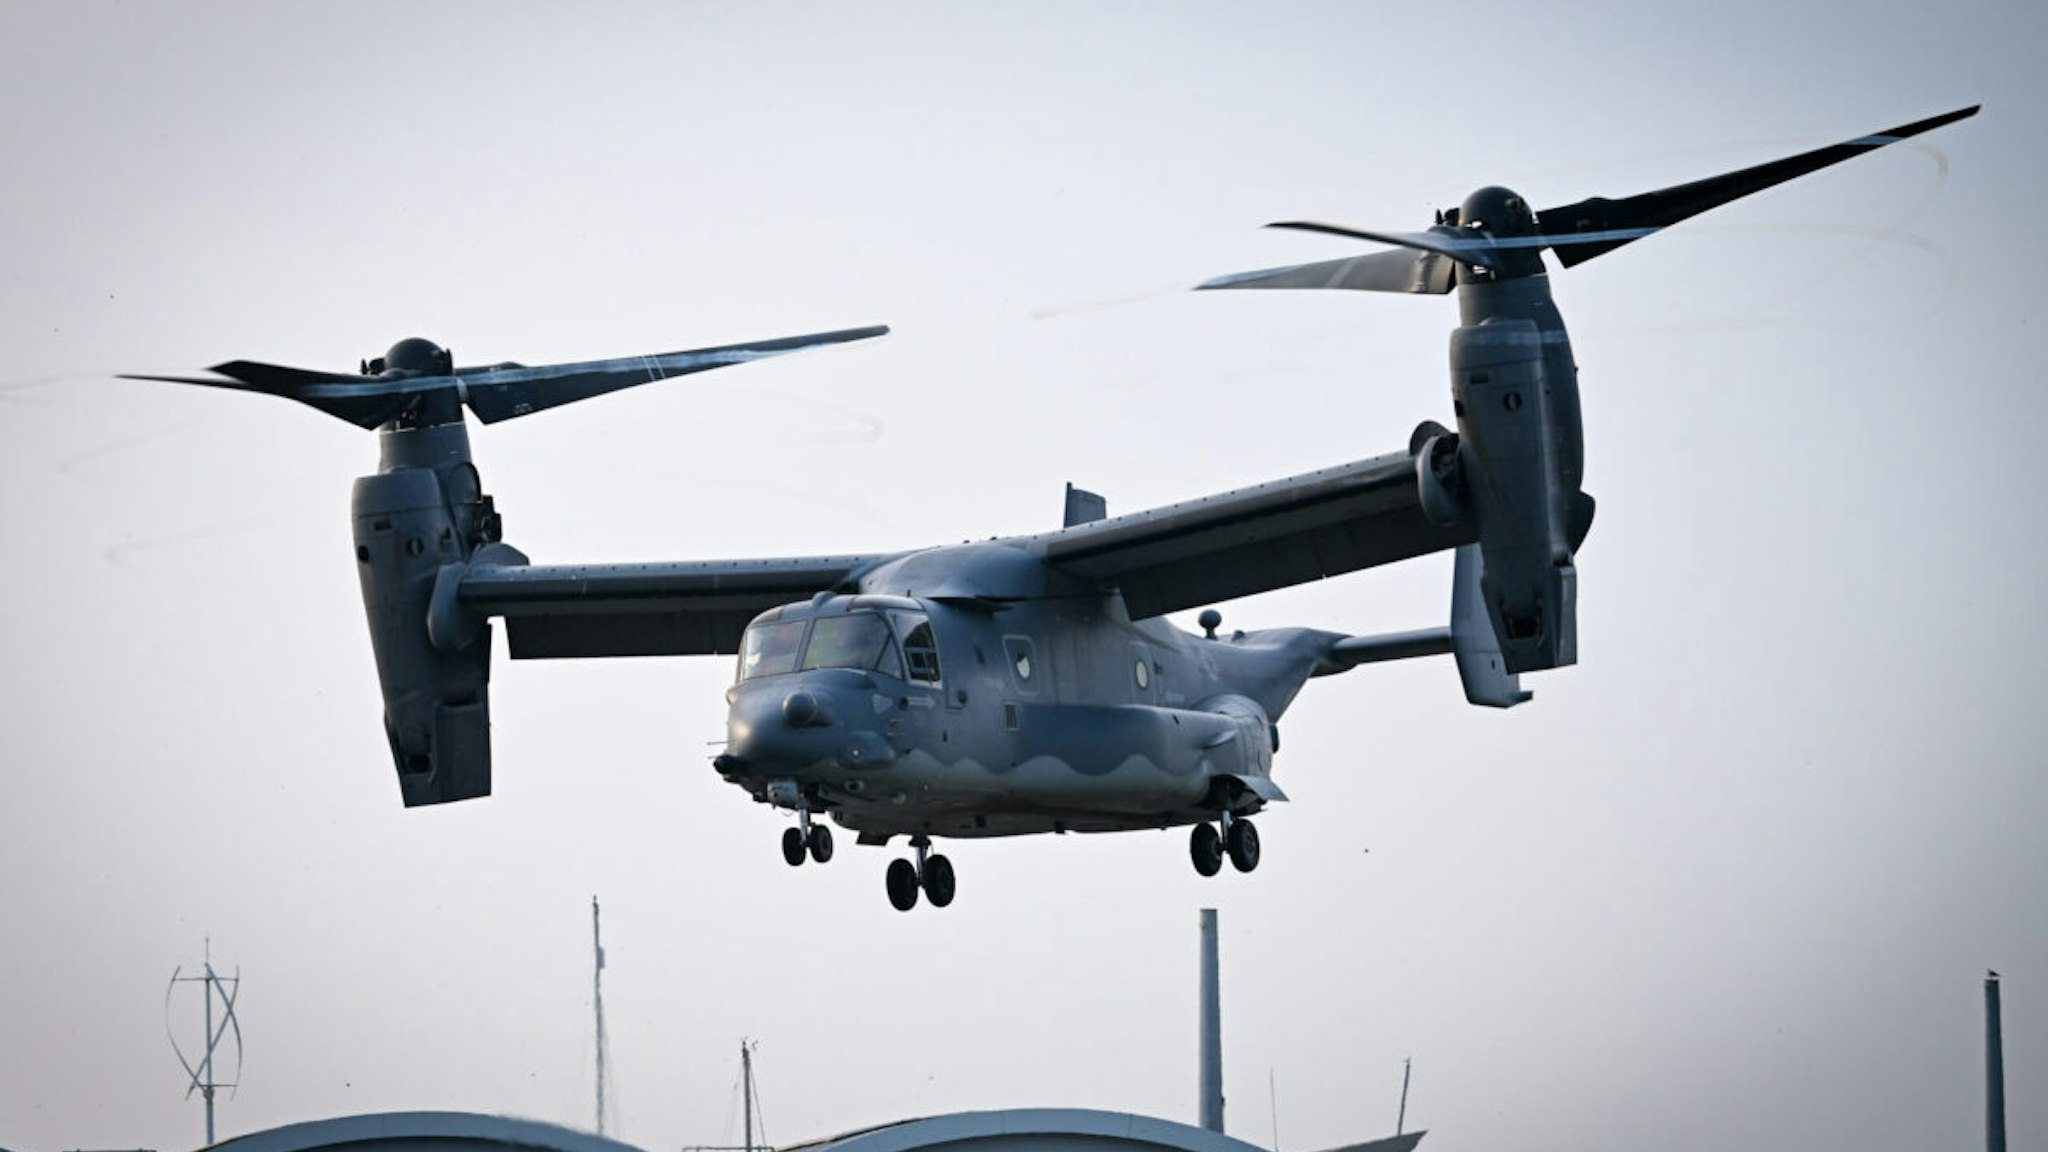 PORTLAND, ENGLAND - MARCH 30: A US Air Force (USAF) Bell-Boeing CV-22B Osprey tiltrotor military aircraft takes off at HeliOperations base, on March 30, 2022 in Portland, United Kingdom.